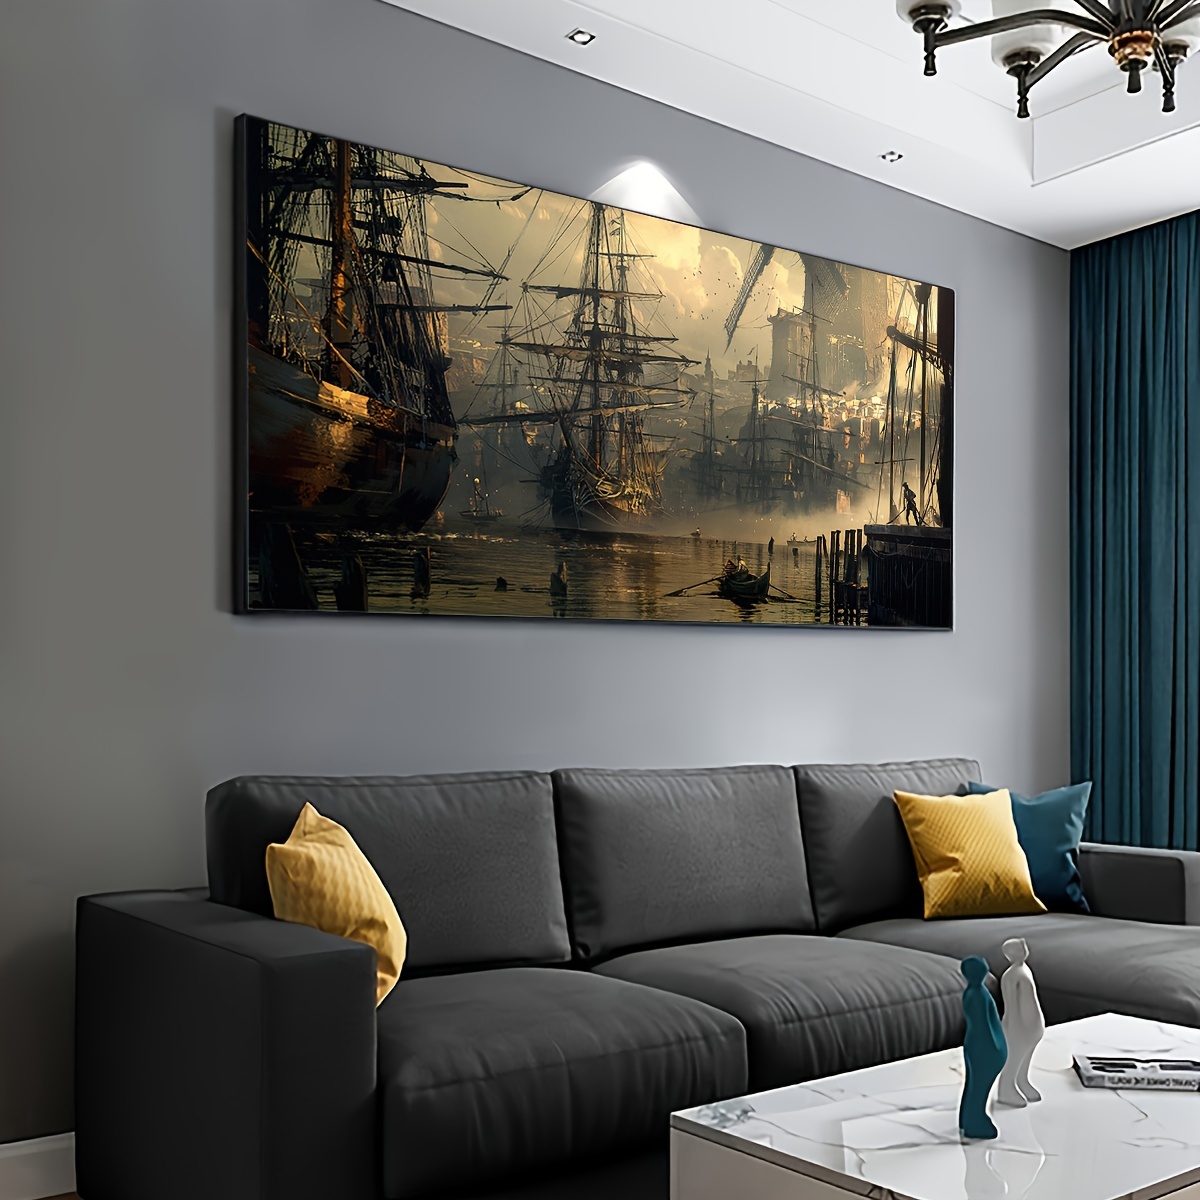 

Large Canvas Sailboat Oil Painting Print, High-quality Wall Art For Living Room, Bedroom, Bathroom, Kitchen, Office, And Coffee Shop Decor